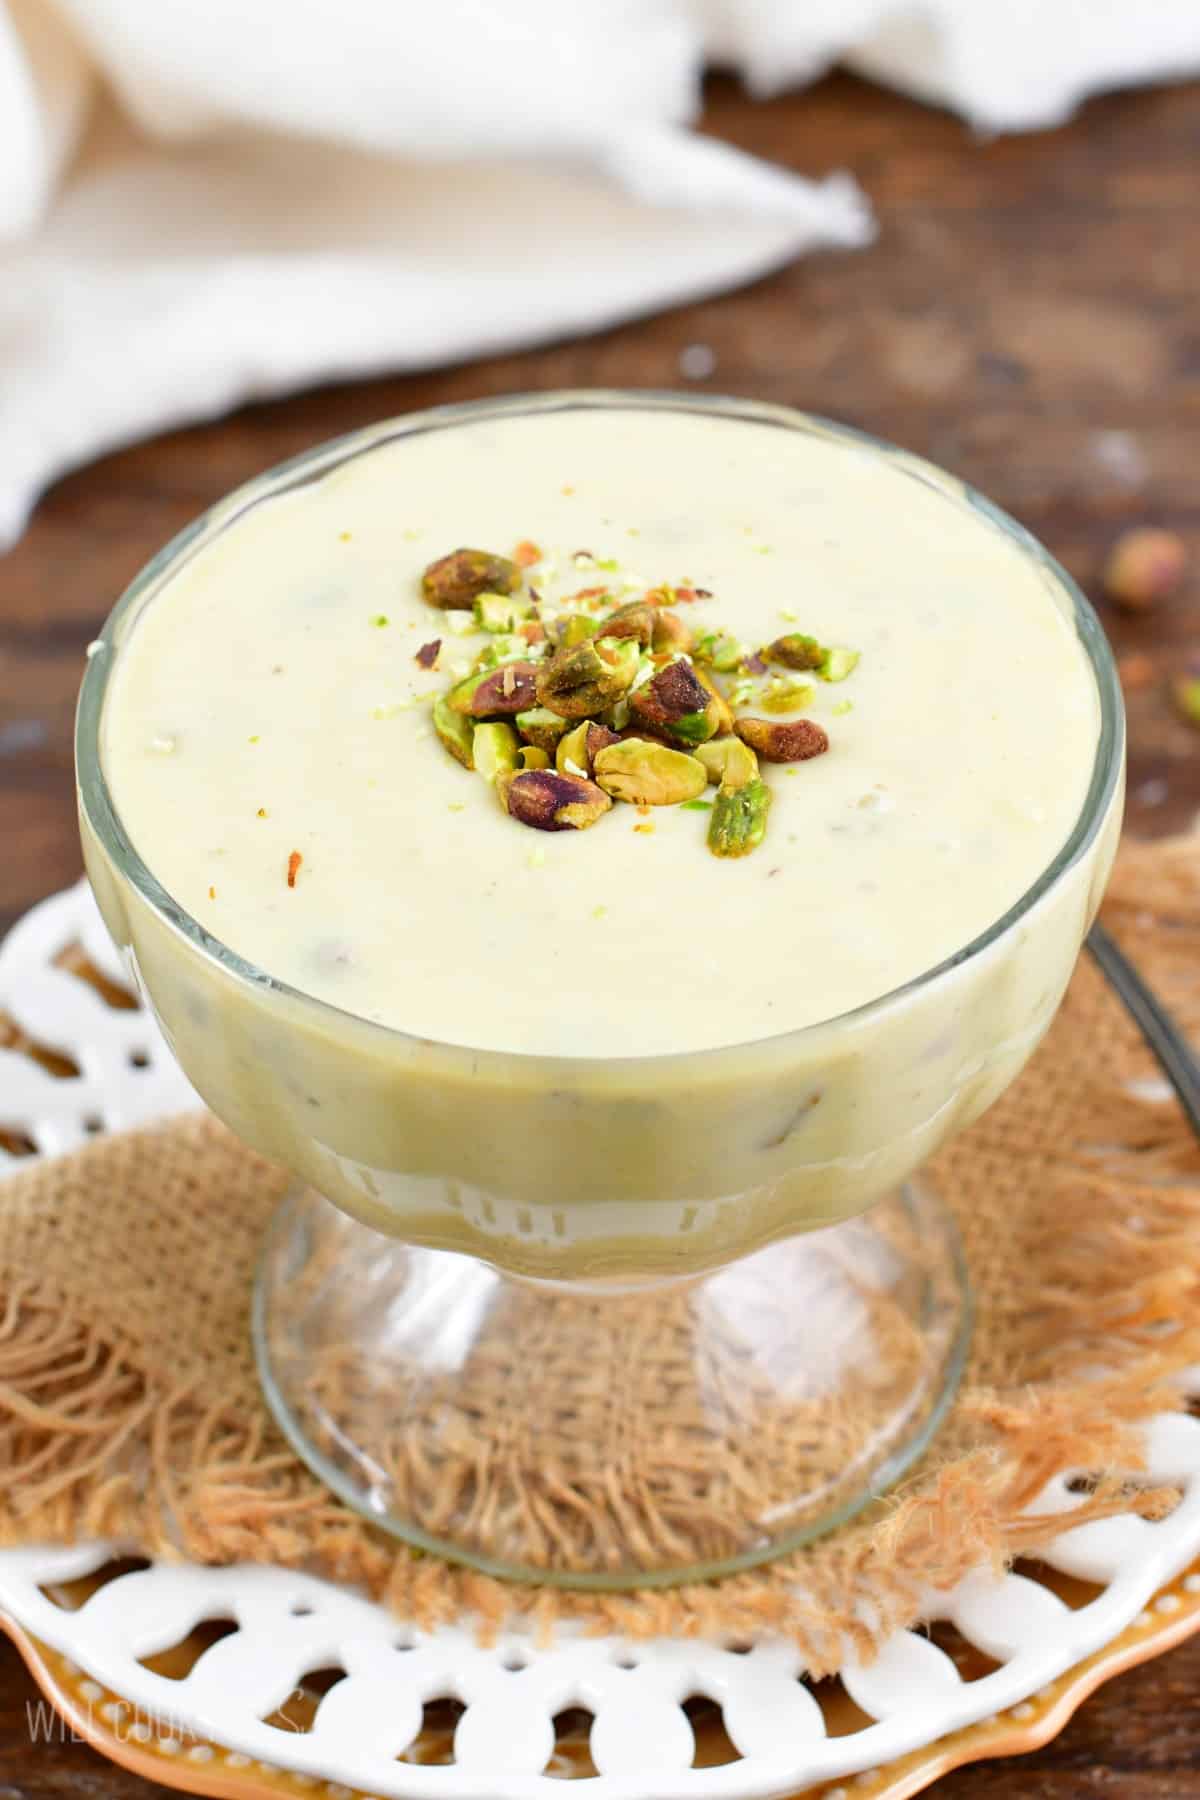 pistachio pudding in a serving bowl on a burlap napkin on a white plate.